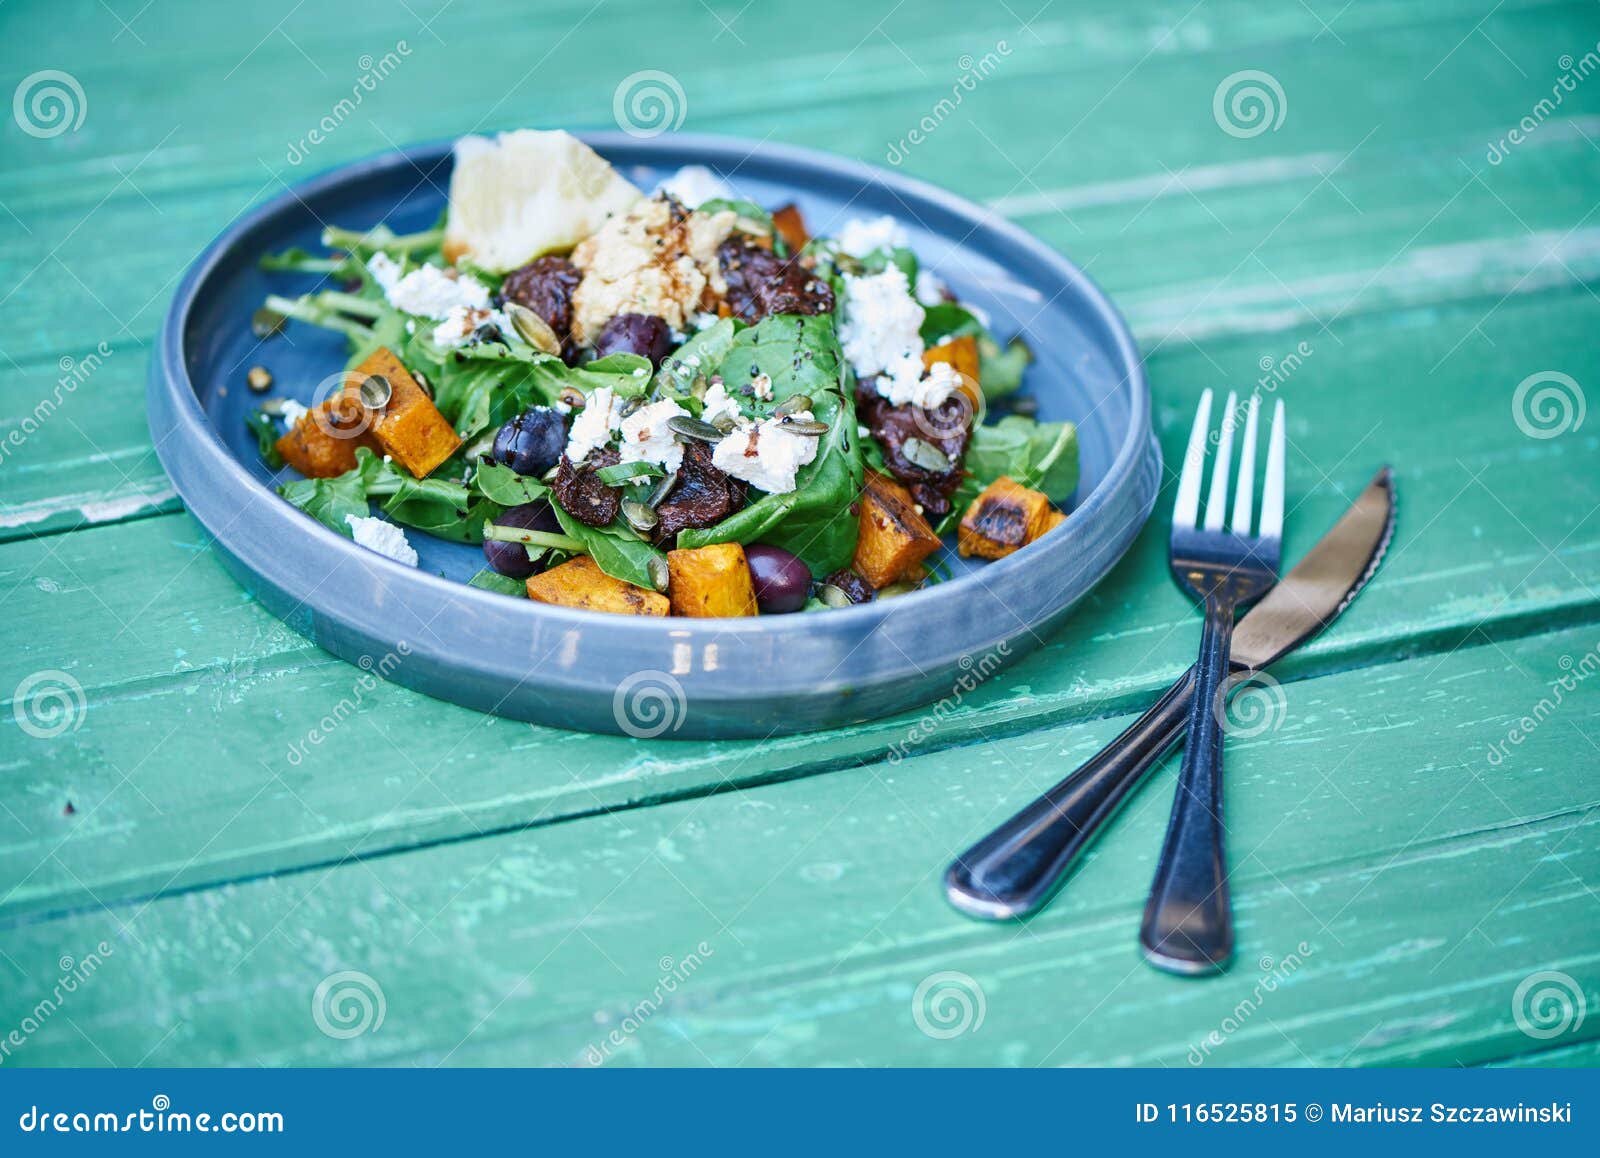 Delicious Mixed Salad Sitting On A Rustic Turquoise Wooden Table Stock